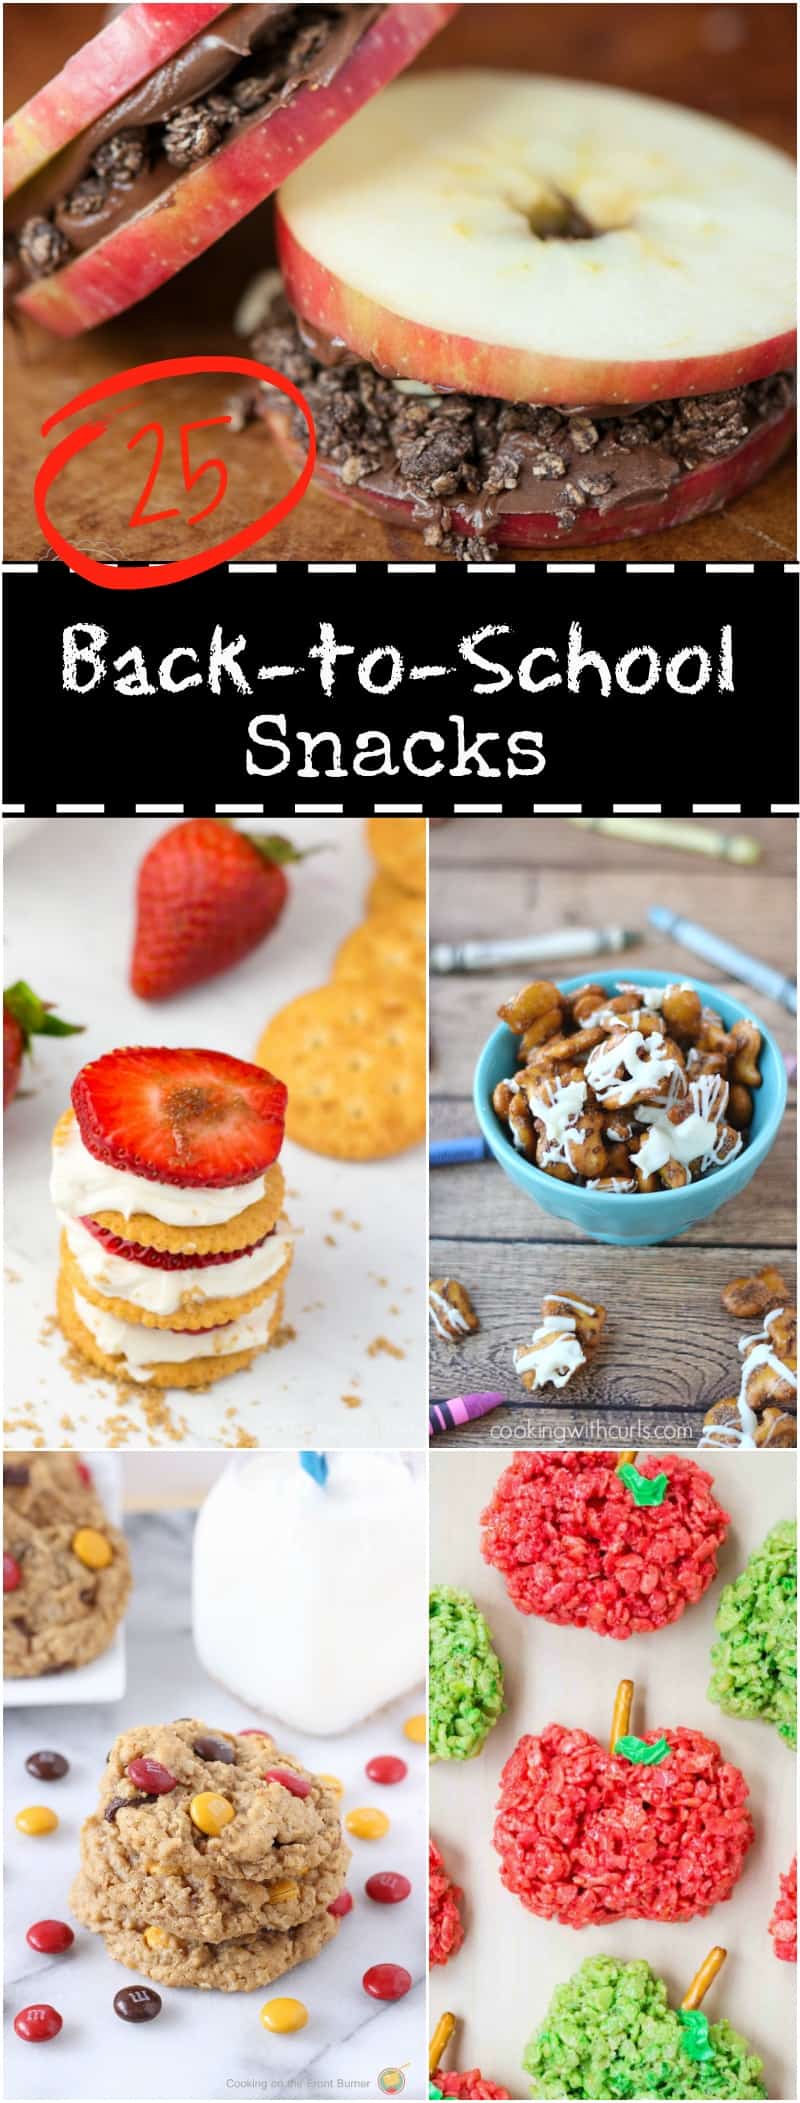 25 Back to School Snacks to refuel those hungry kids after a long day at school cookingonthefrontburners.com